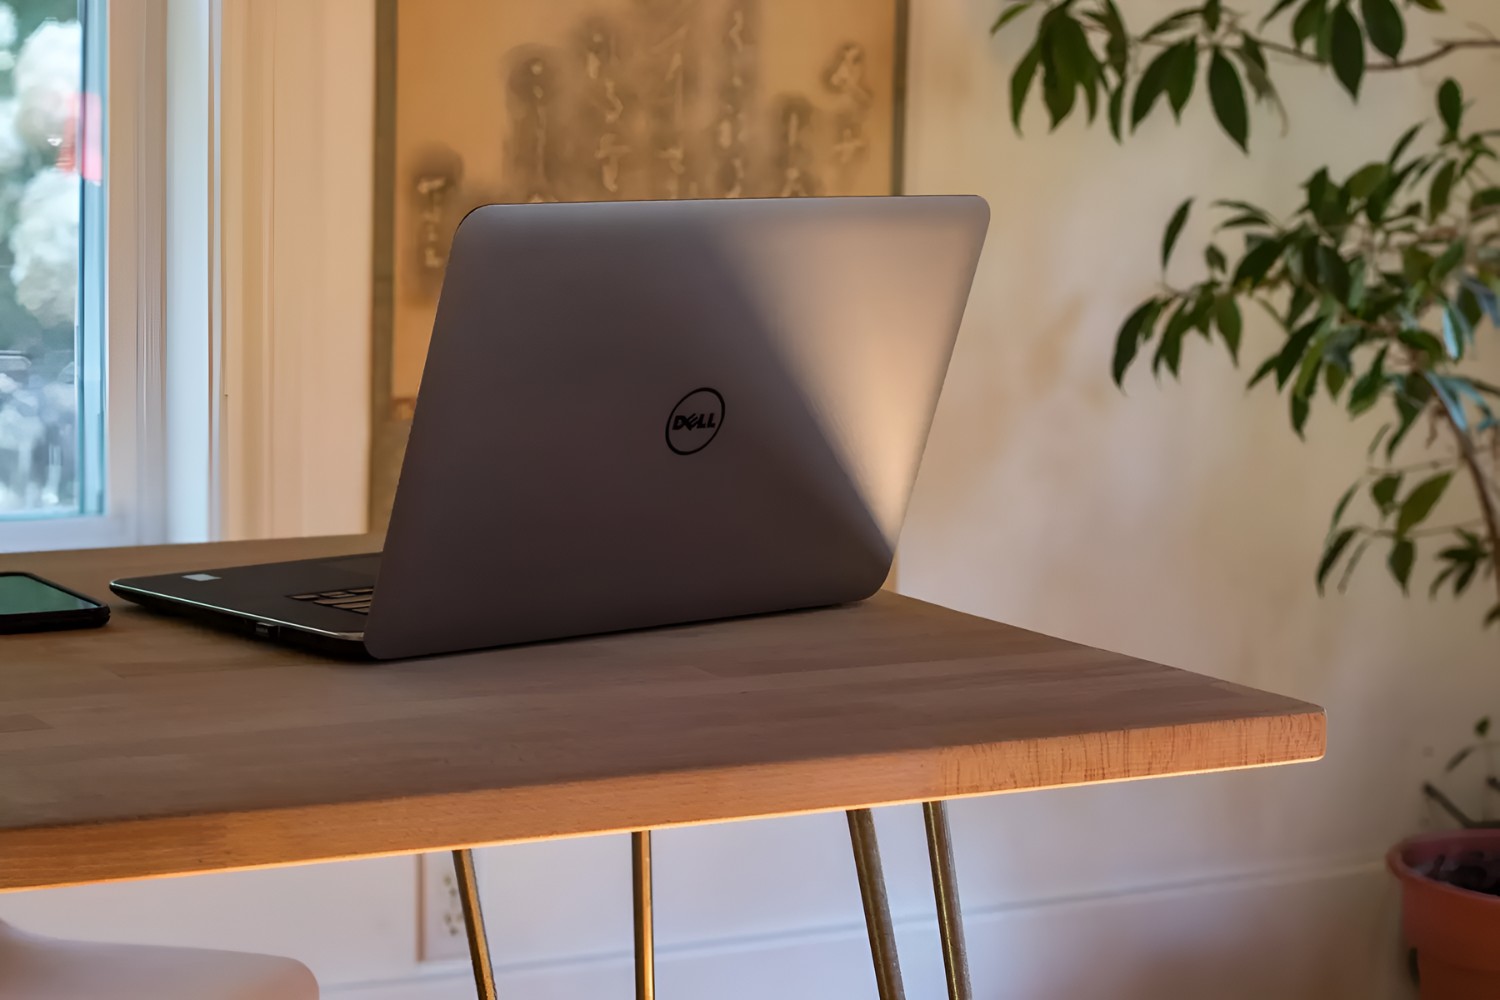 How To Do A Factory Reset On A Dell Ultrabook